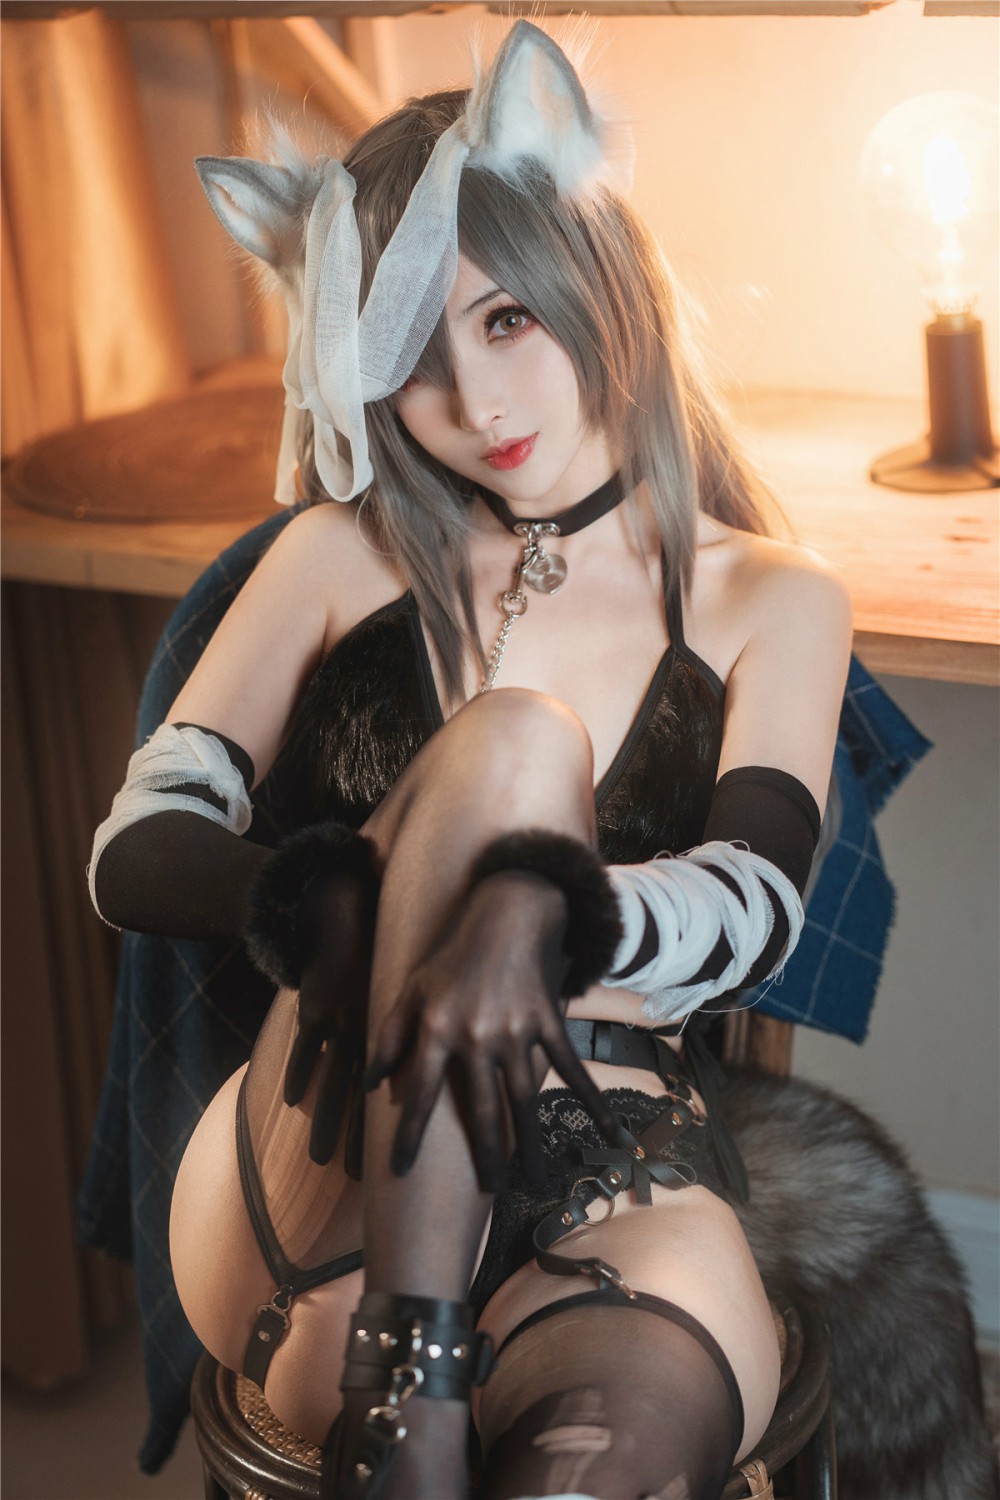 [Cosplay]rioko凉凉子 - Wounded Wolf Sister4 